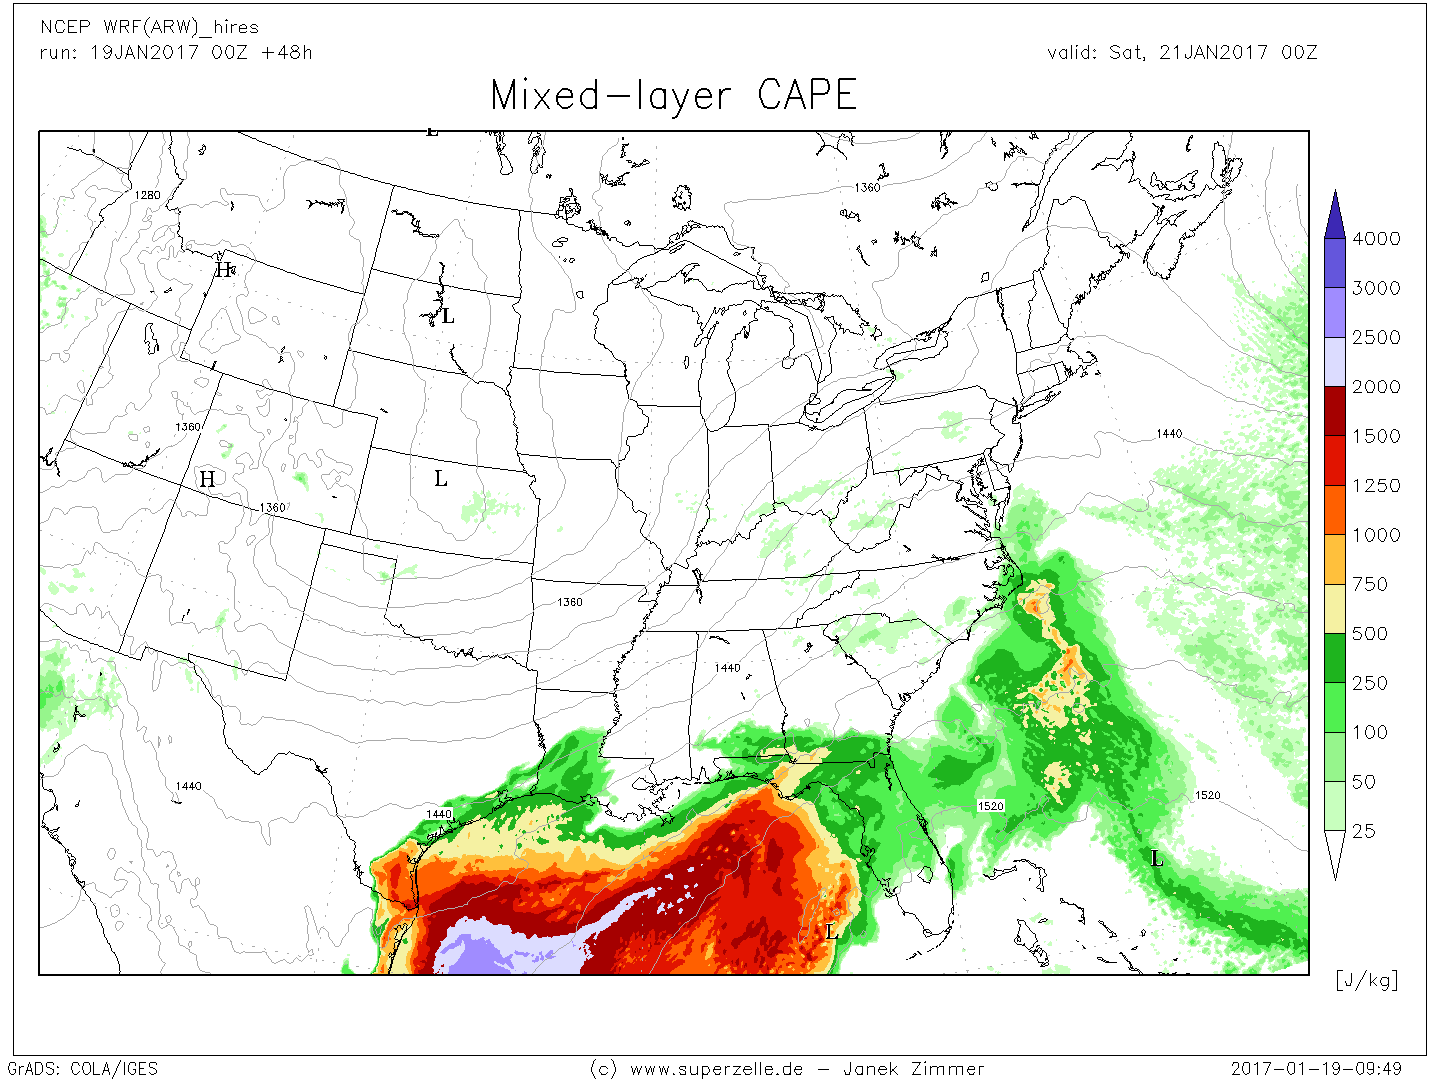 MLCAPE_nam.png